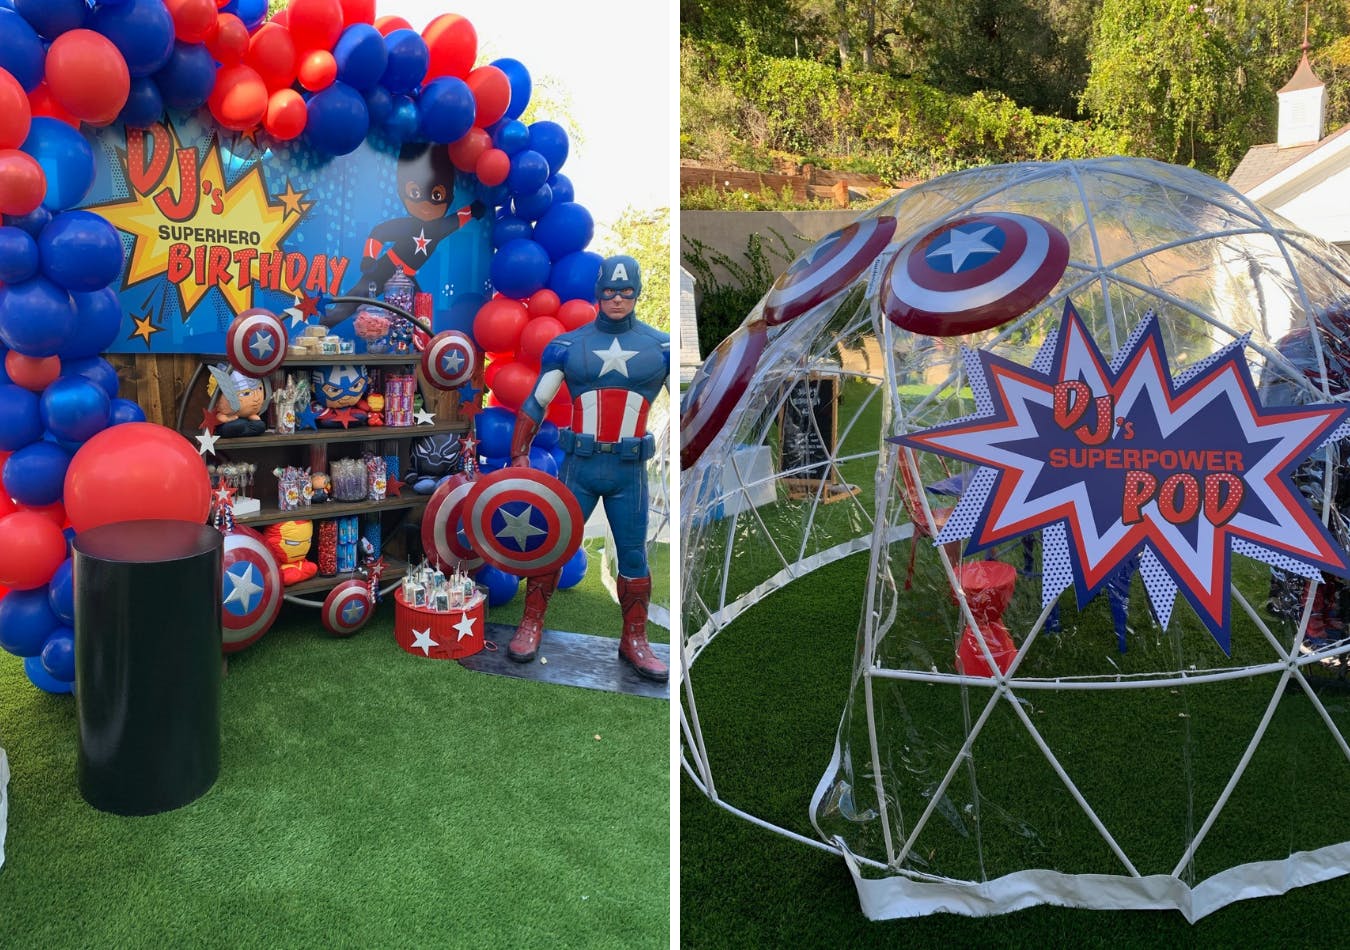 Superhero birthday party with blue and red balloons and igloo pod | PartySlate